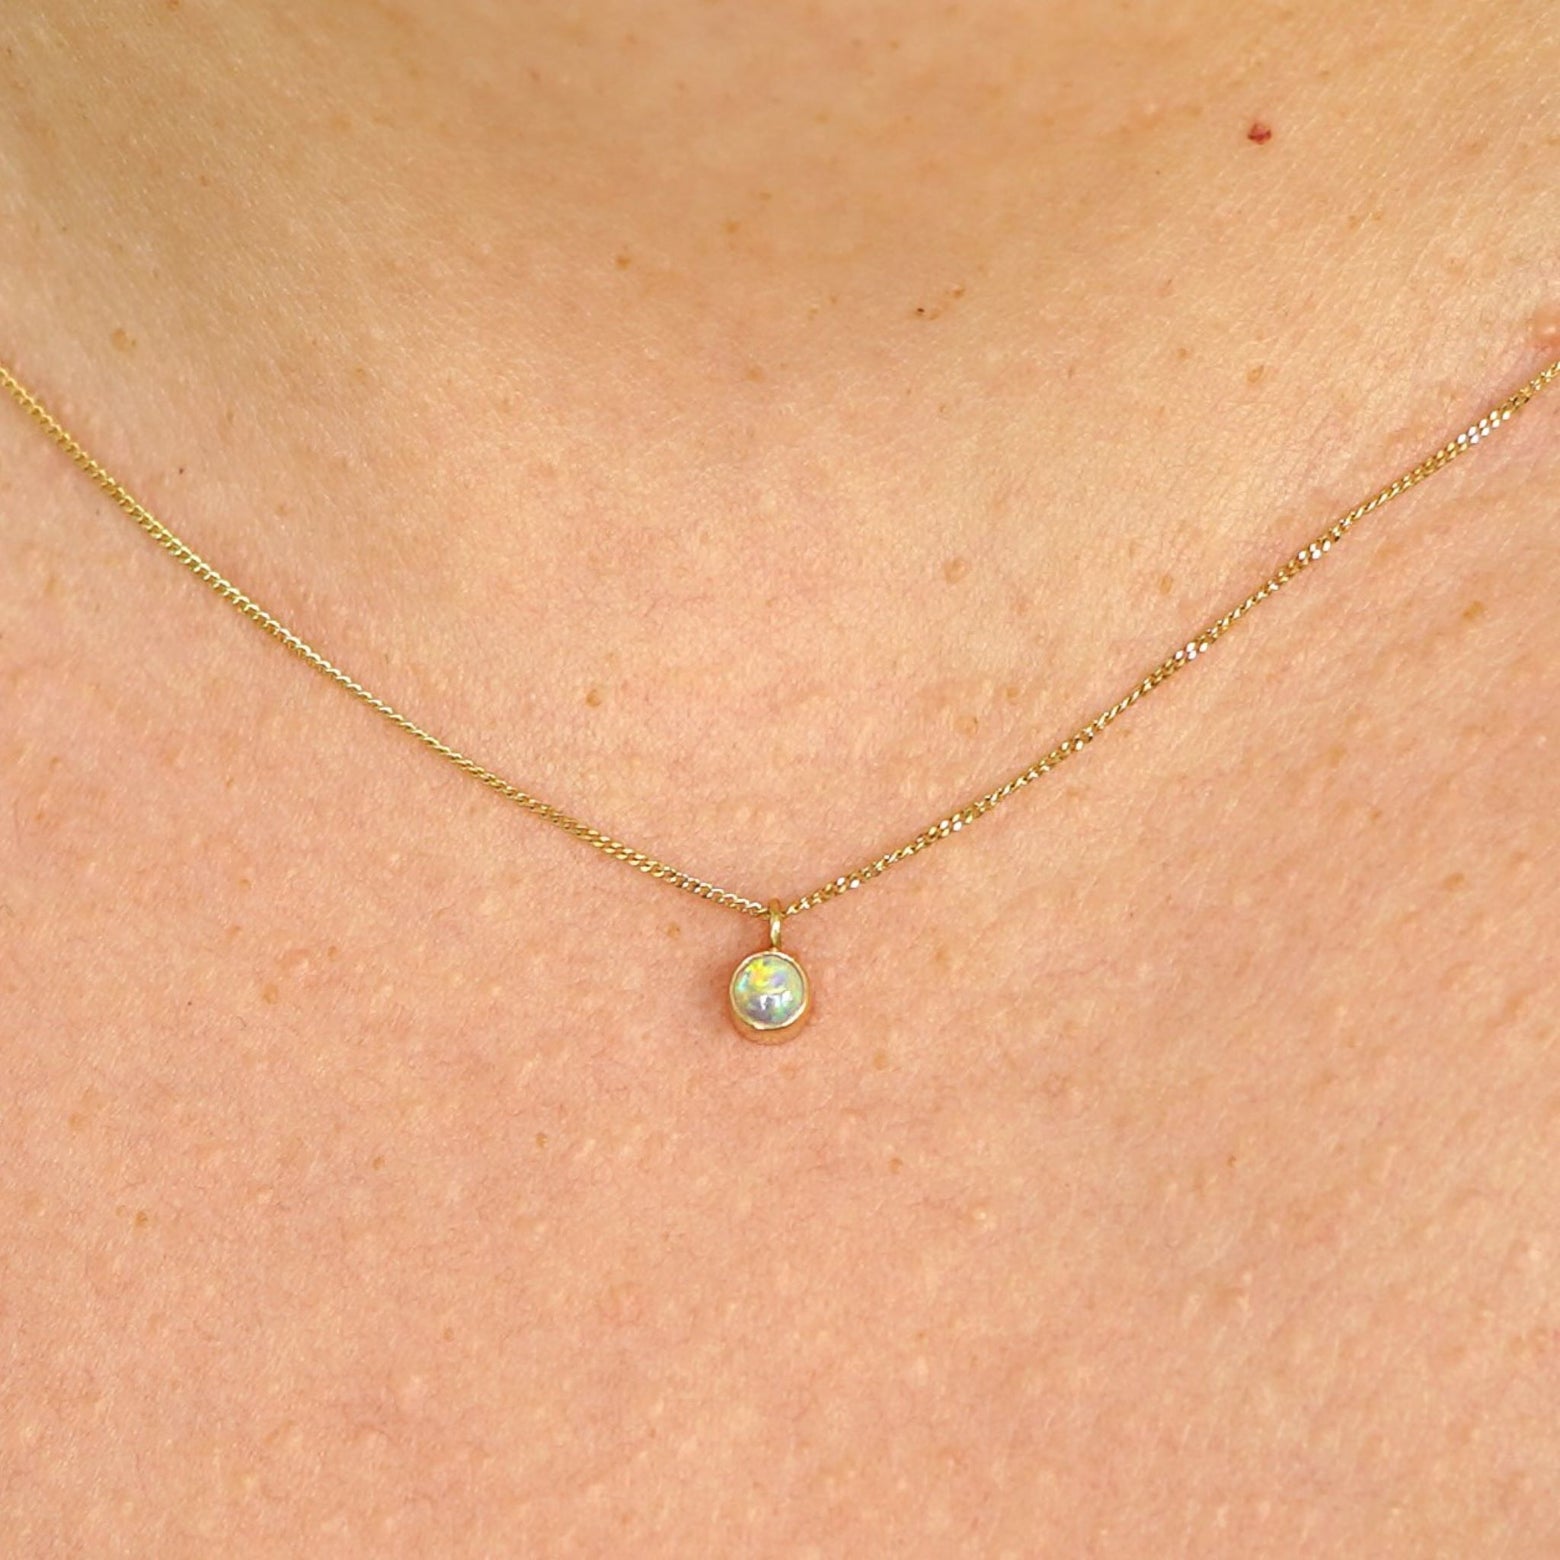 Close up view of a model's neck wearing a solid 14k yellow gold Opal necklace